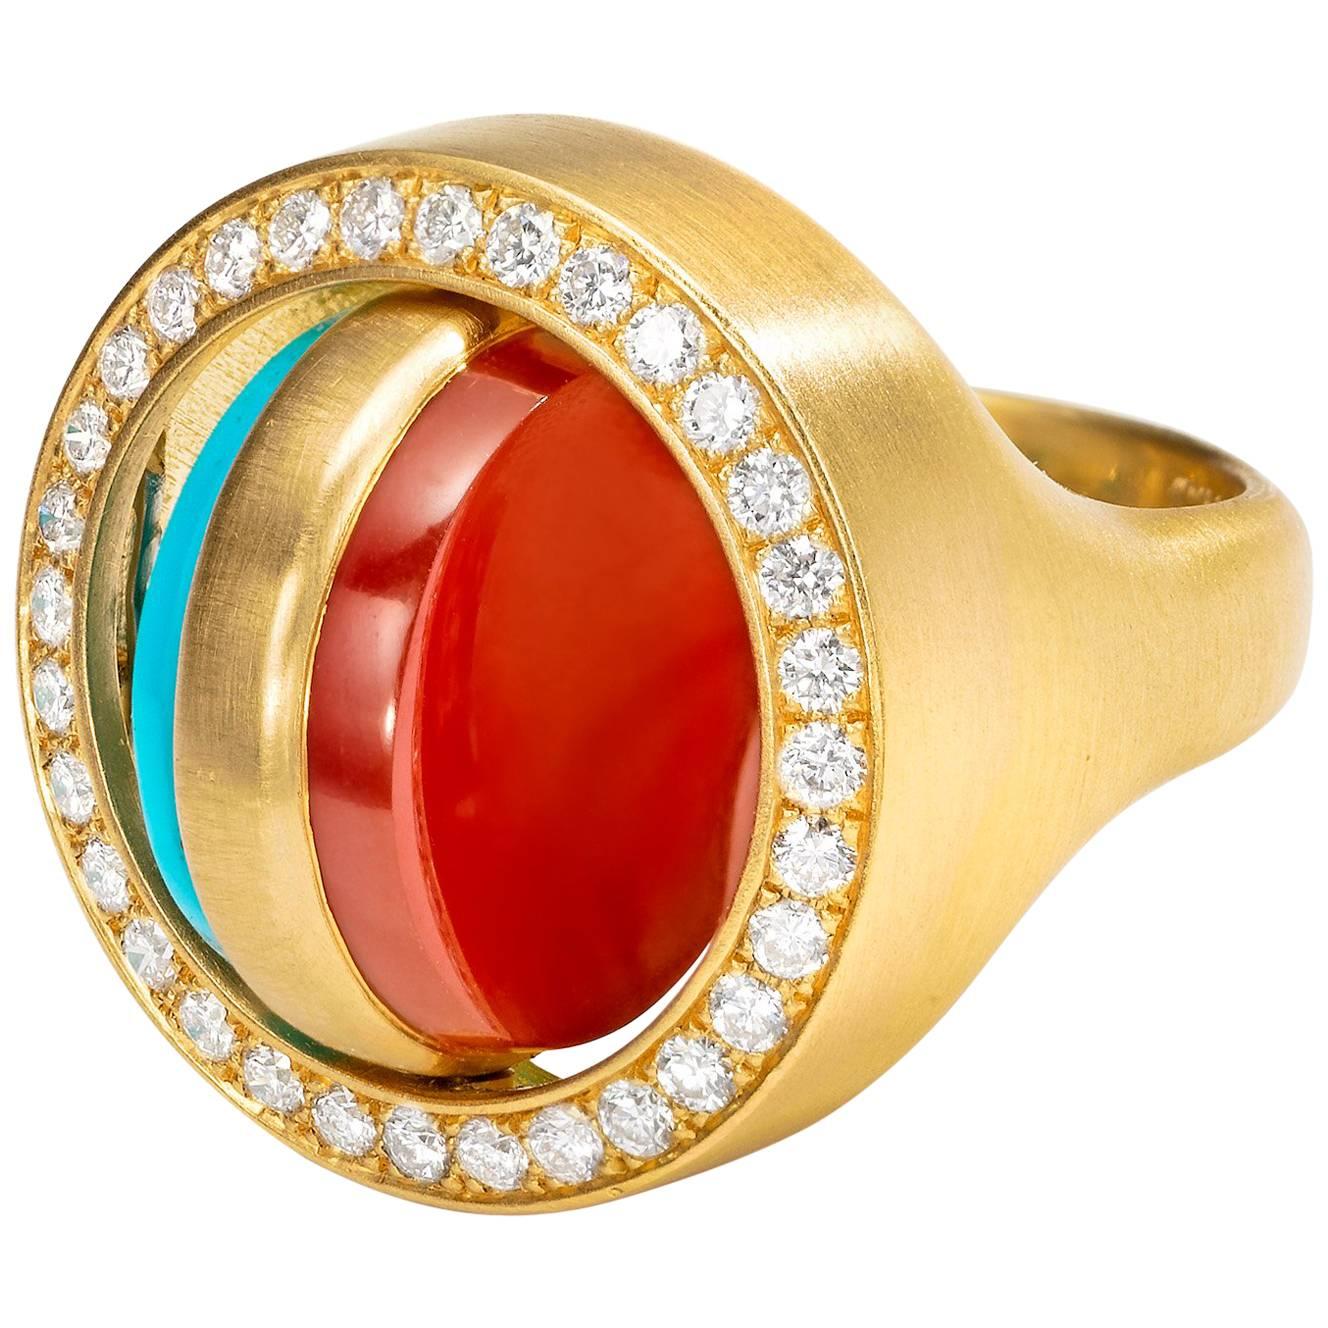 Two one-of-a-kind pieces that are also two-in-one! Wear turquoise or carnelian, depending on your mood. This is a deceptively complicated design with a classic, heirloom look.

RING
Swivel signet-style ring with turquoise center that flips over to